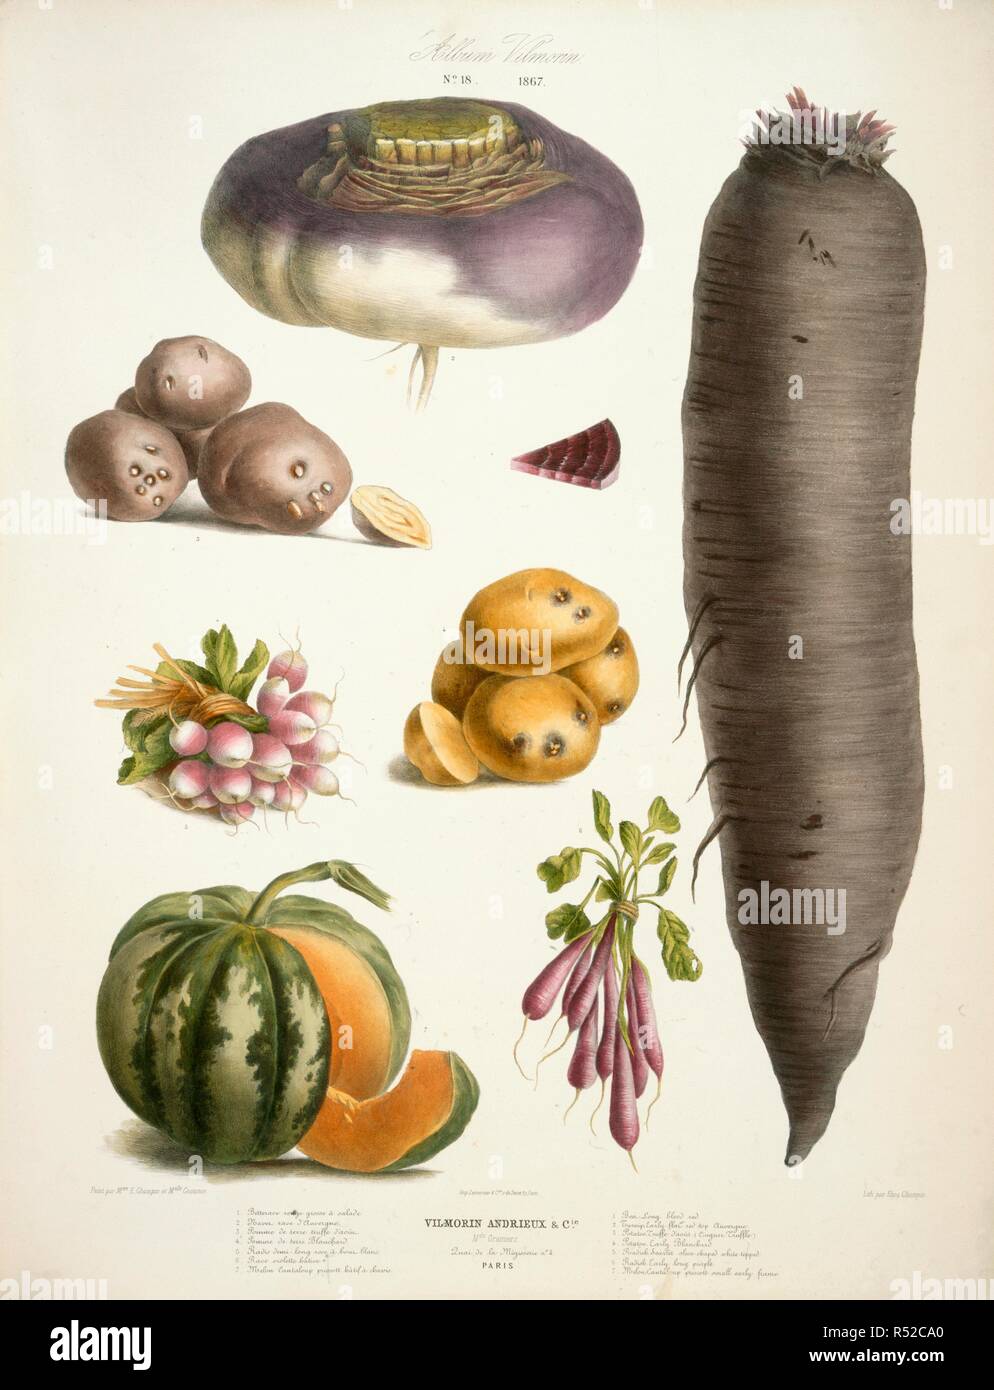 Various vegetables. Album Vilmorin. (68 Coloured plates of vegetables. Paris, 1850. Turnip; Potatoe; Radish; Cantaloupe.  Image taken from Album Vilmorin. (68 Coloured plates of vegetables and flowers printed by E. Champin and Mlle. Coutance.)  Originally published/produced in Paris, 1850. . Source: N.Tab.2004/11, plate 18. Language: French. Stock Photo